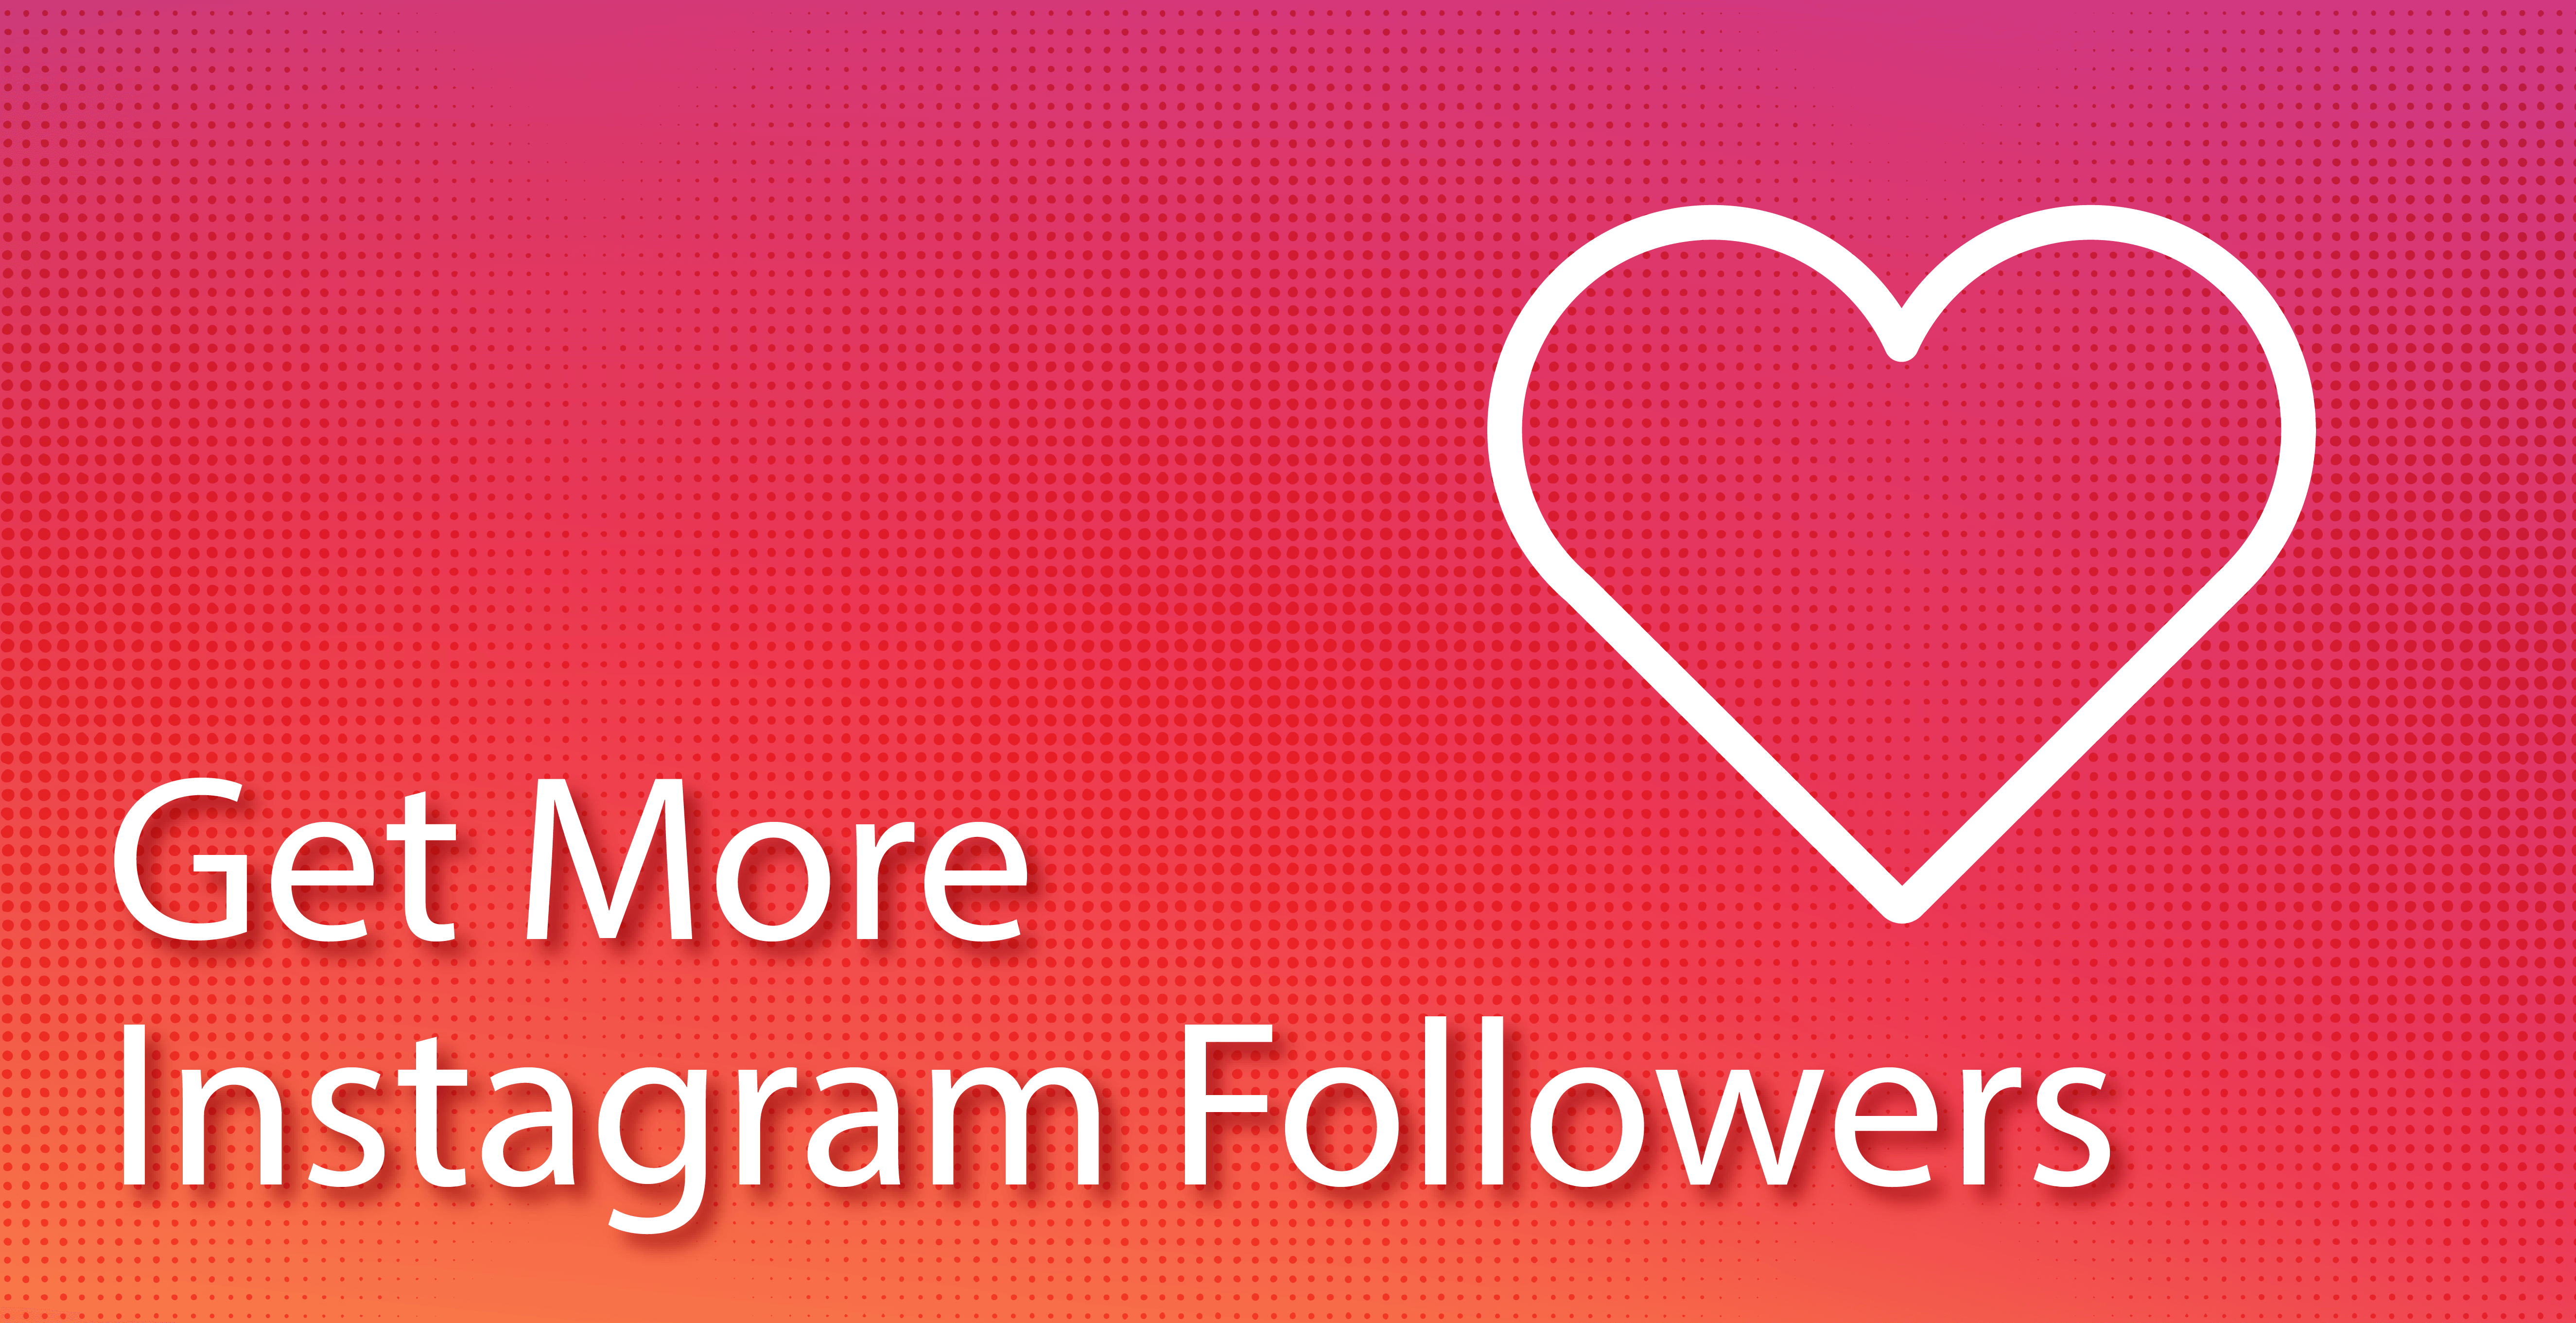 targeted Instagram followers